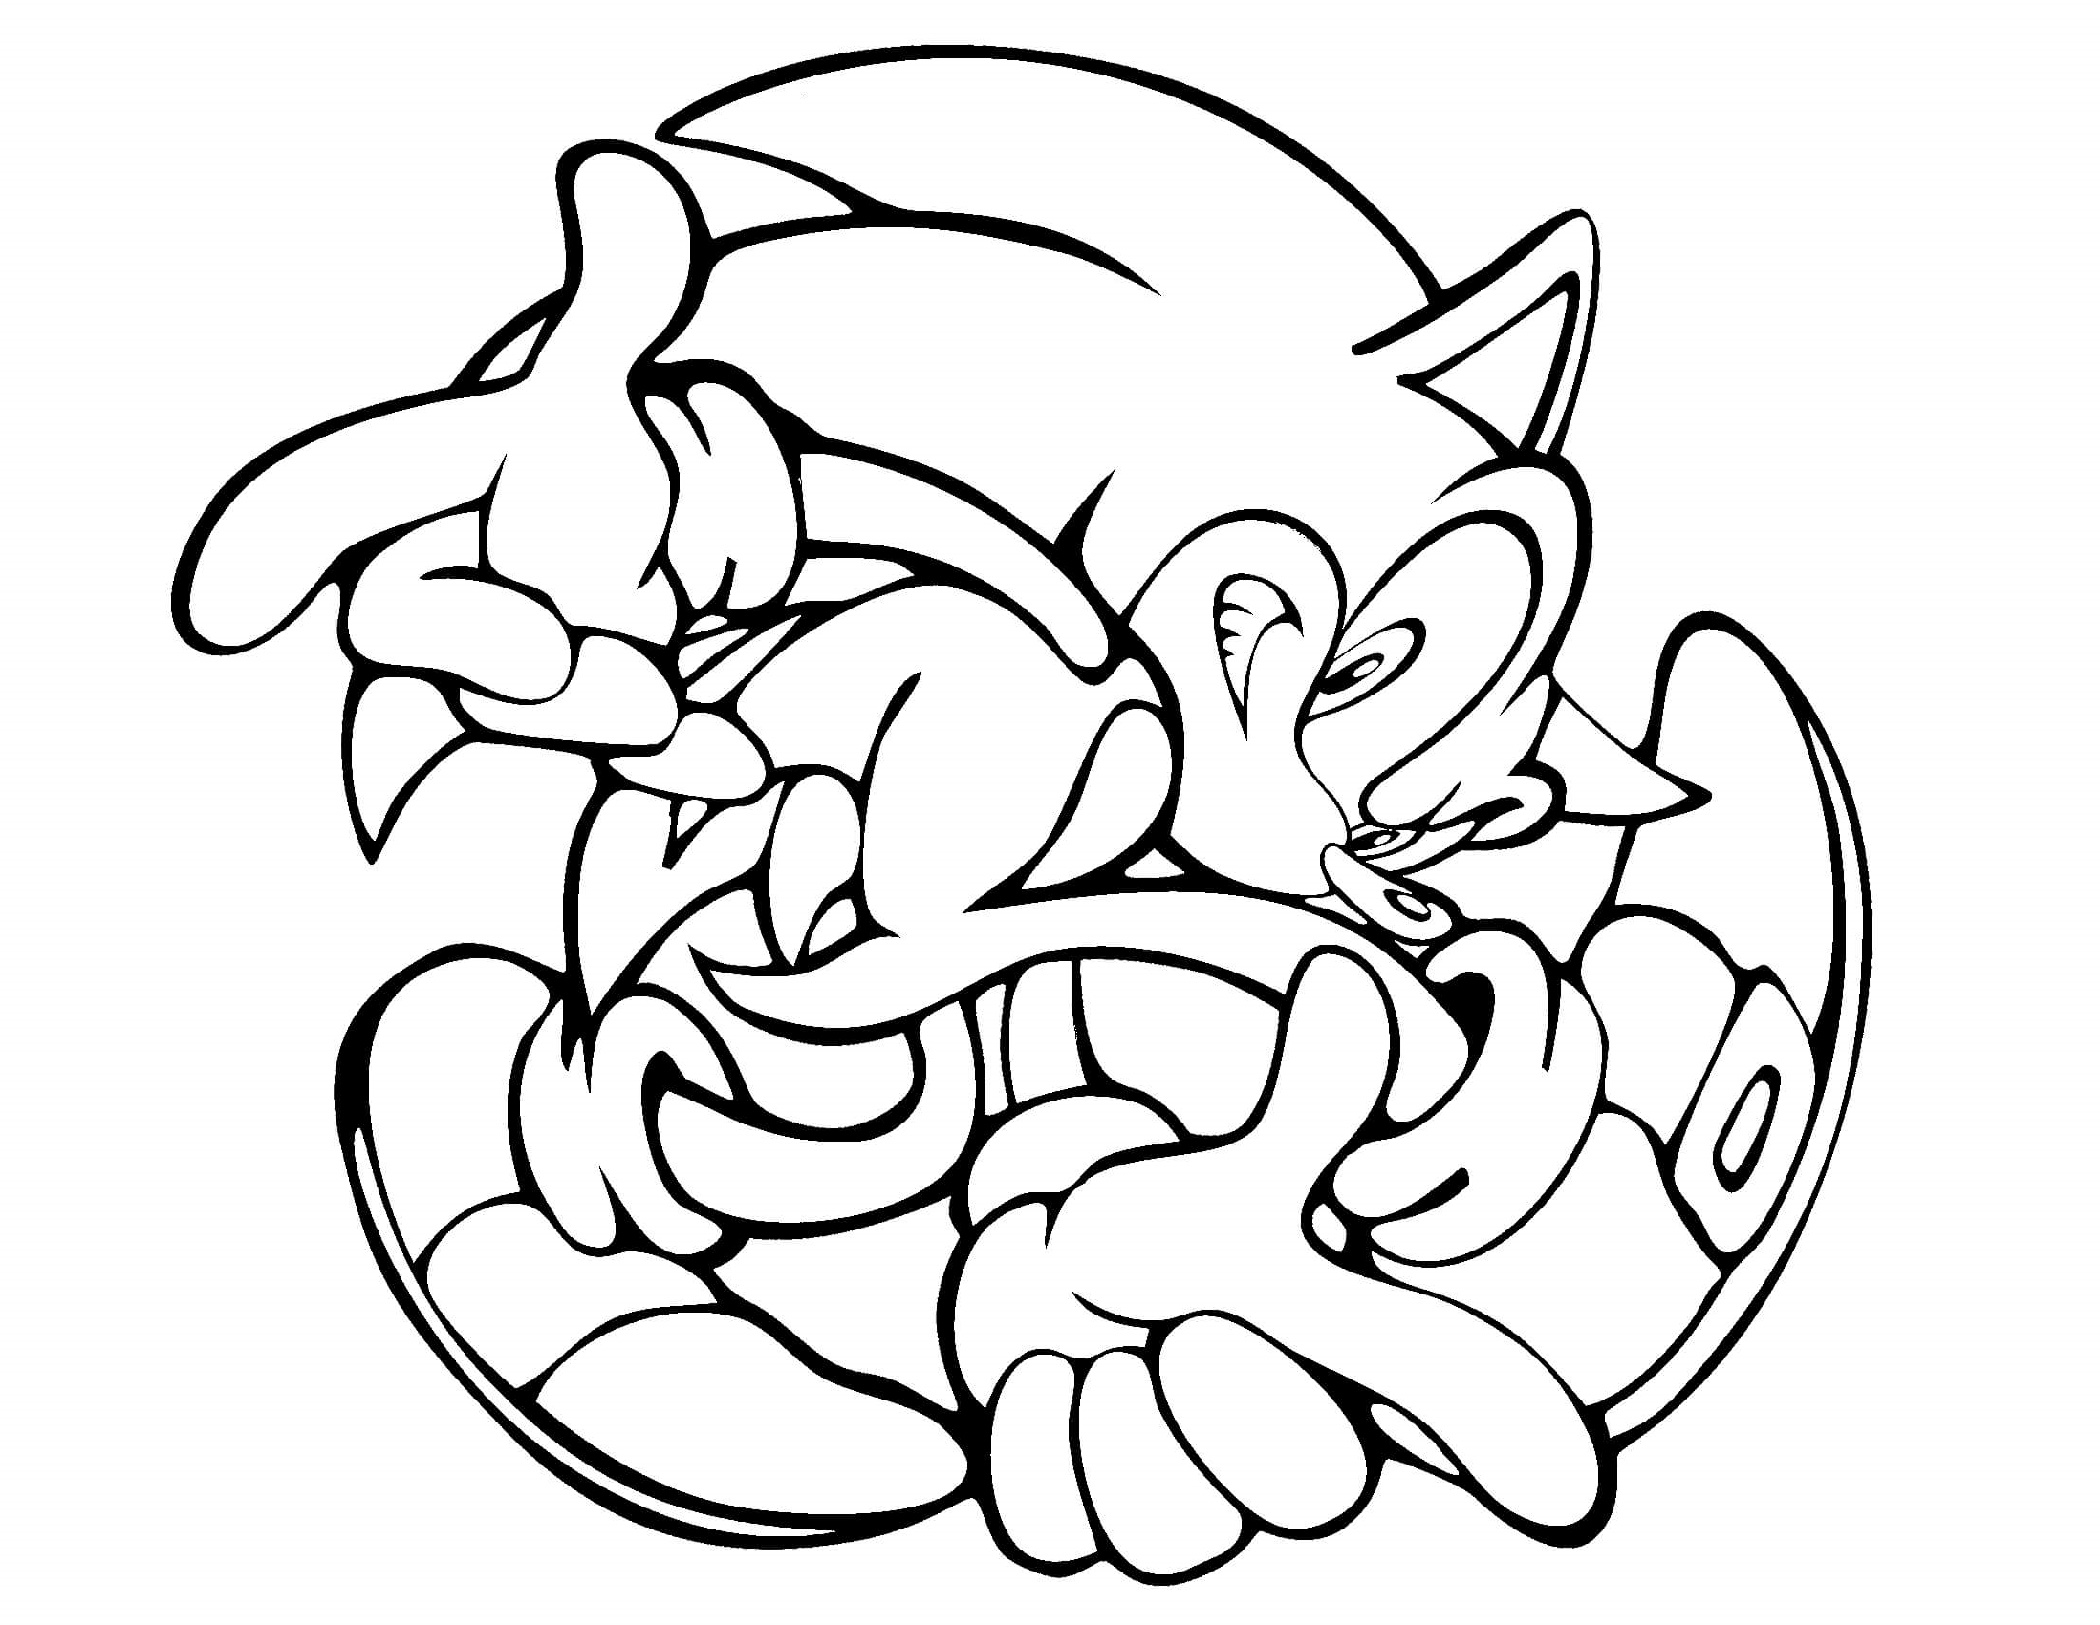 Sonic Coloring Pages Free